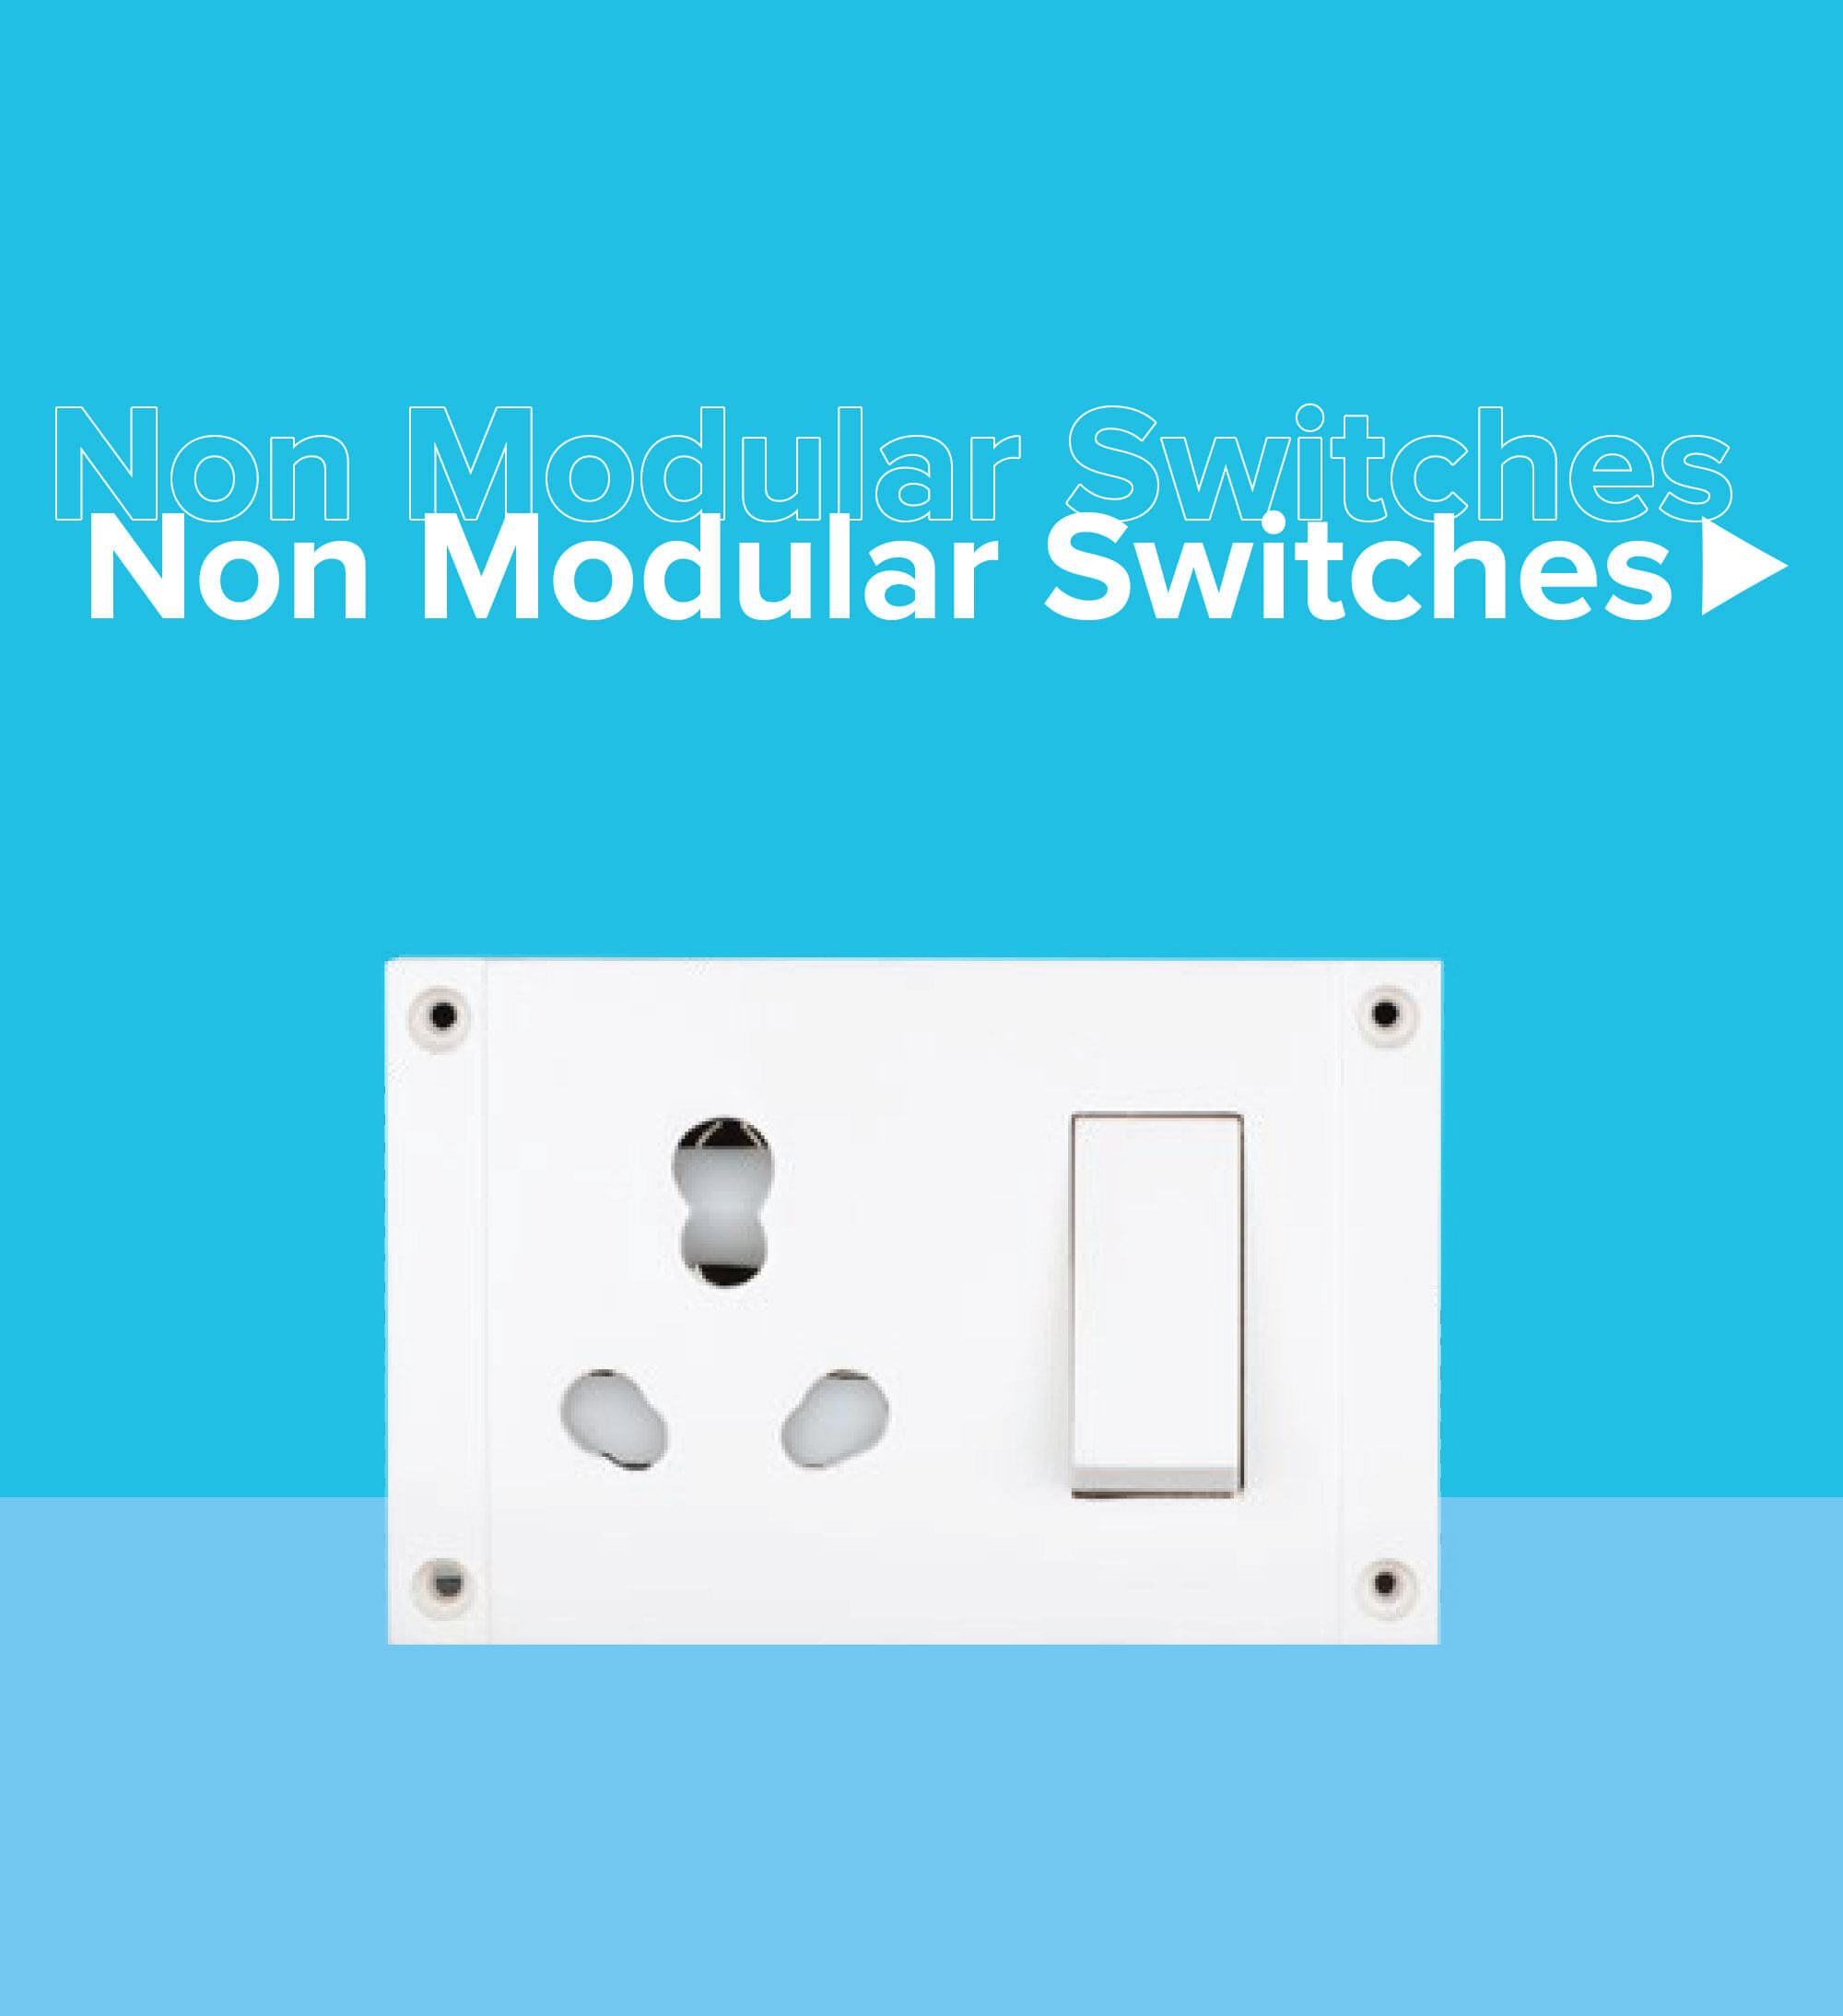 Series 5's Elegant Miniature Circuit Breaker and Modular Electrical Switches